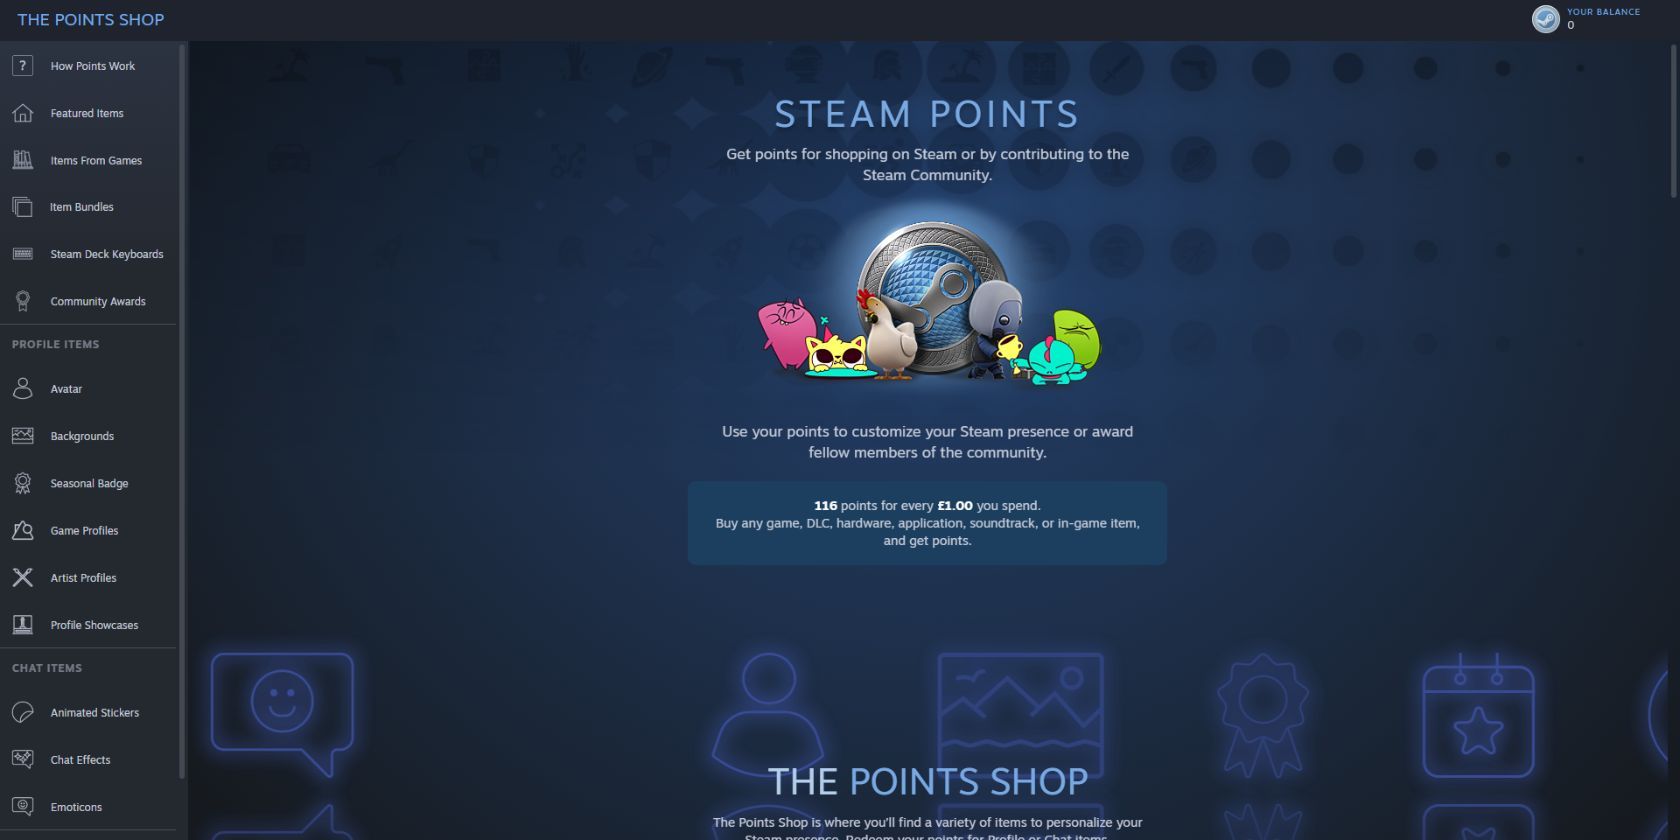 The homepage of the Steam Points Shop